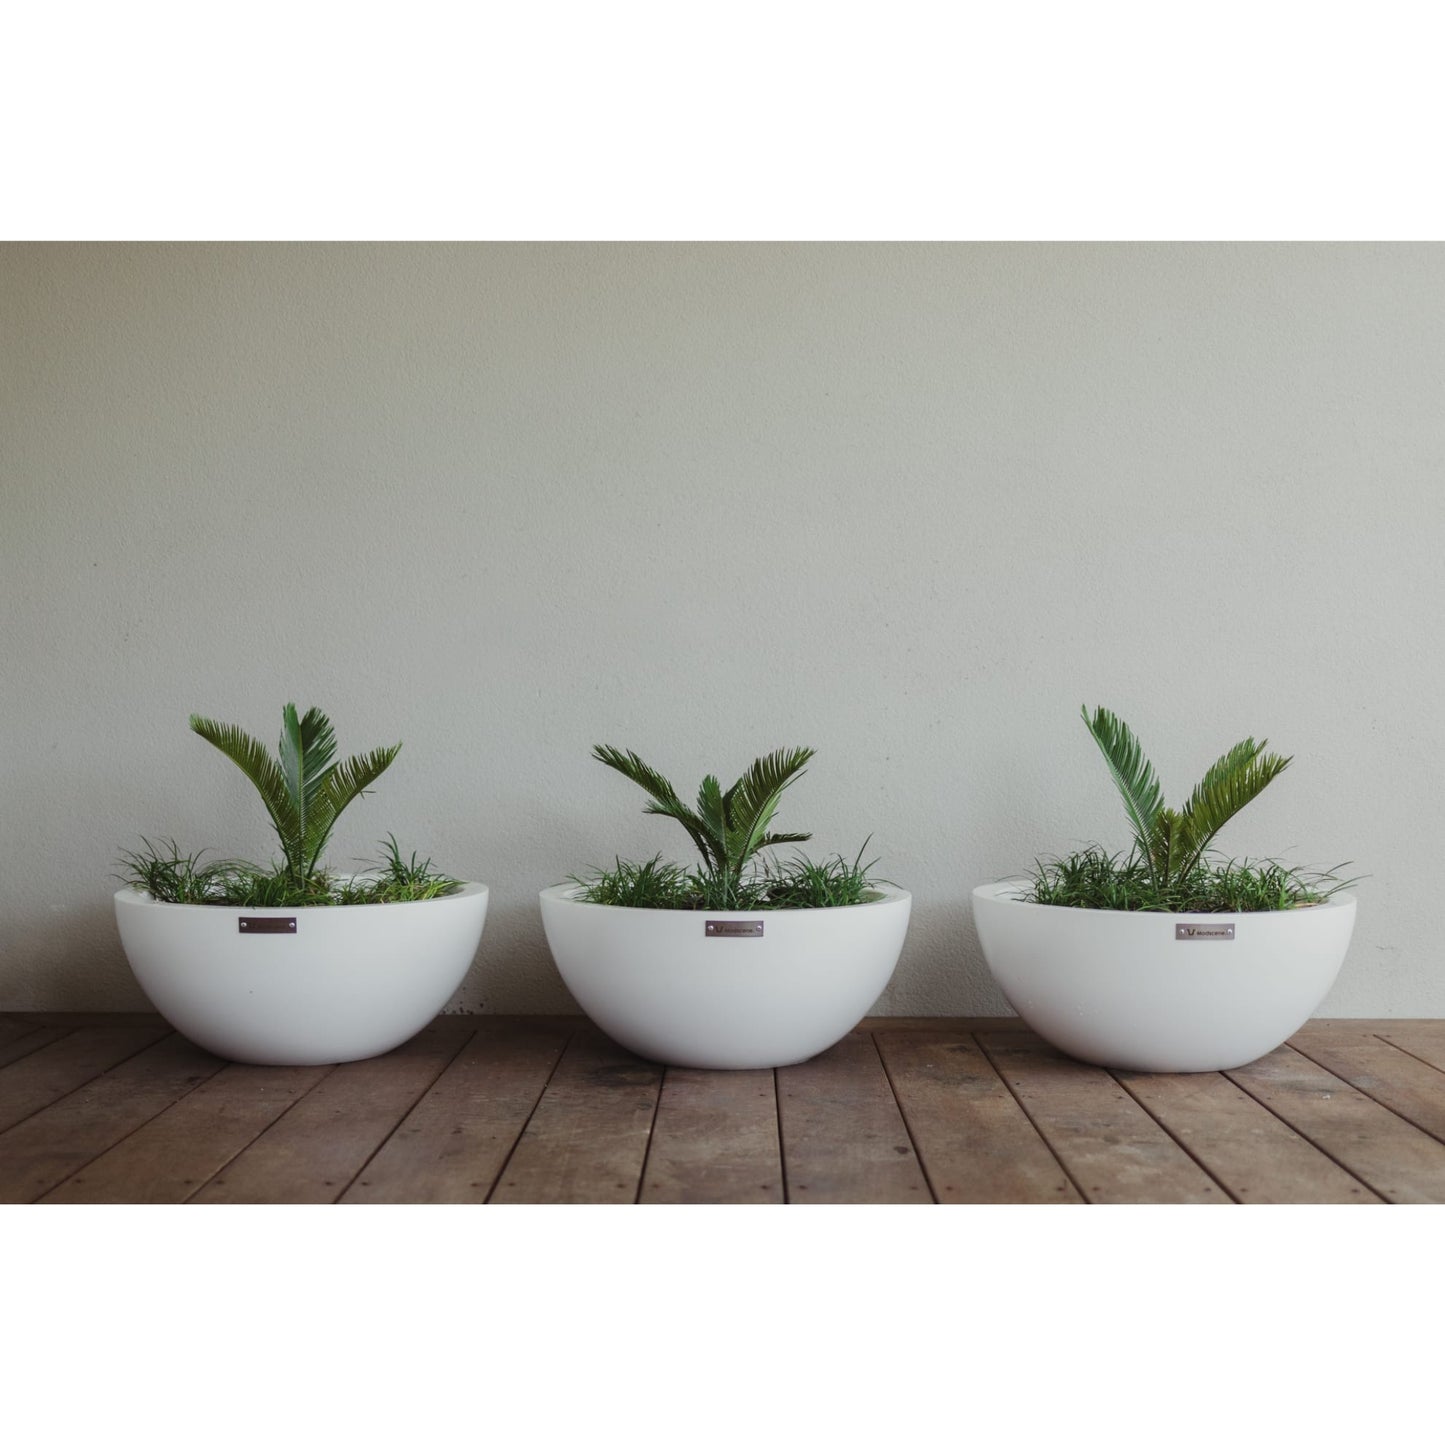 A cluster of three white planter bowls sitting on a wooden deck.